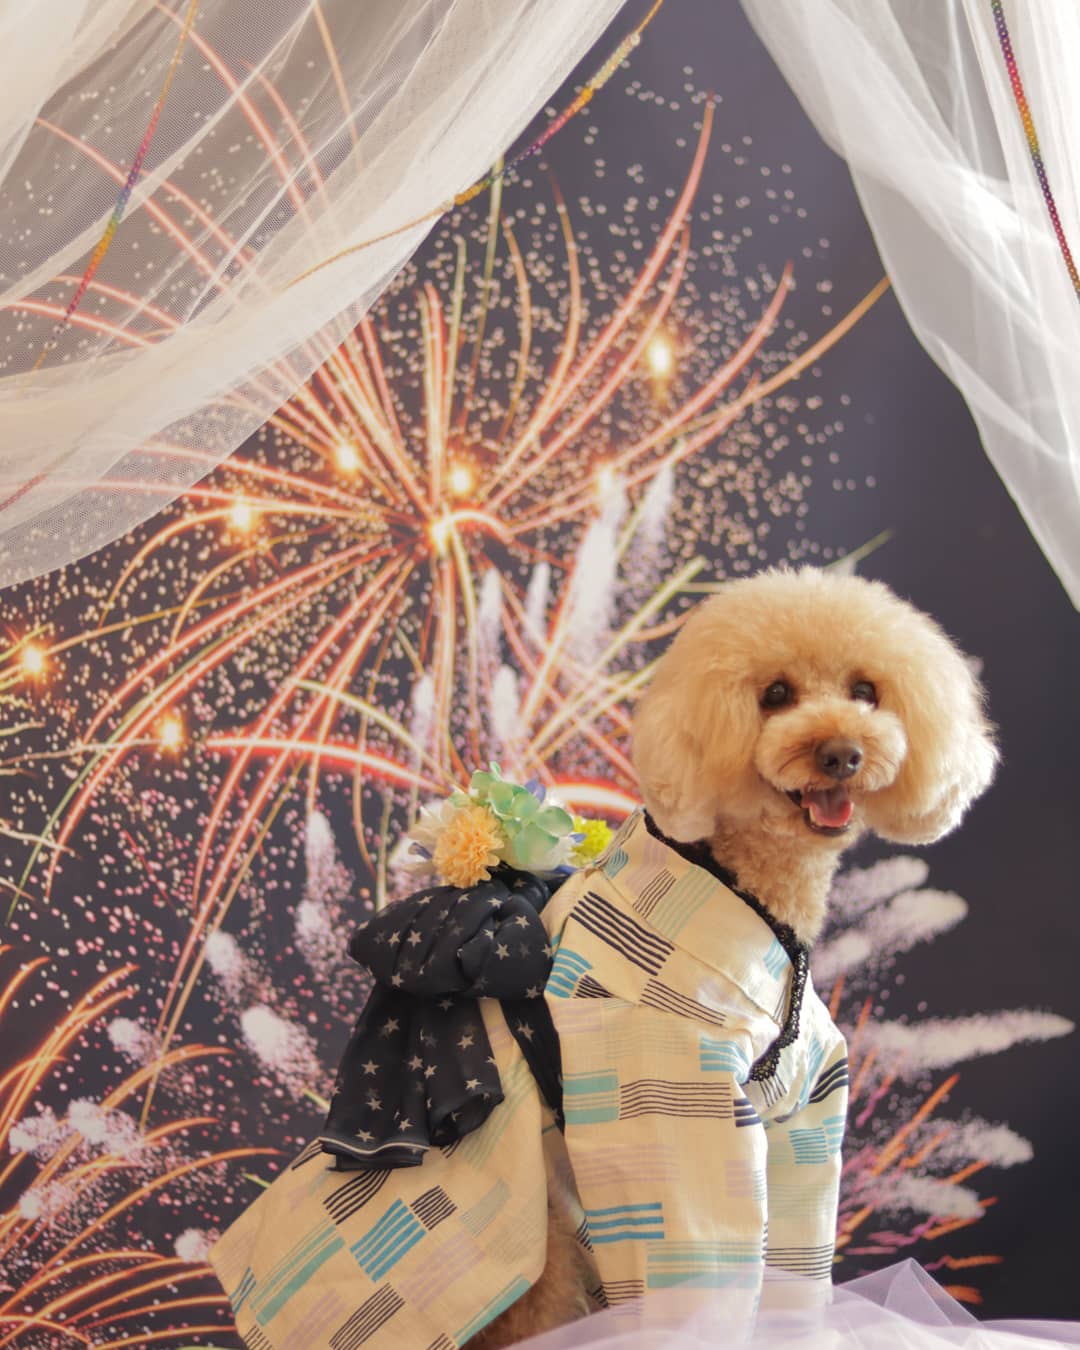 Poodle in a japanese clothe standing with fireworks in the sky